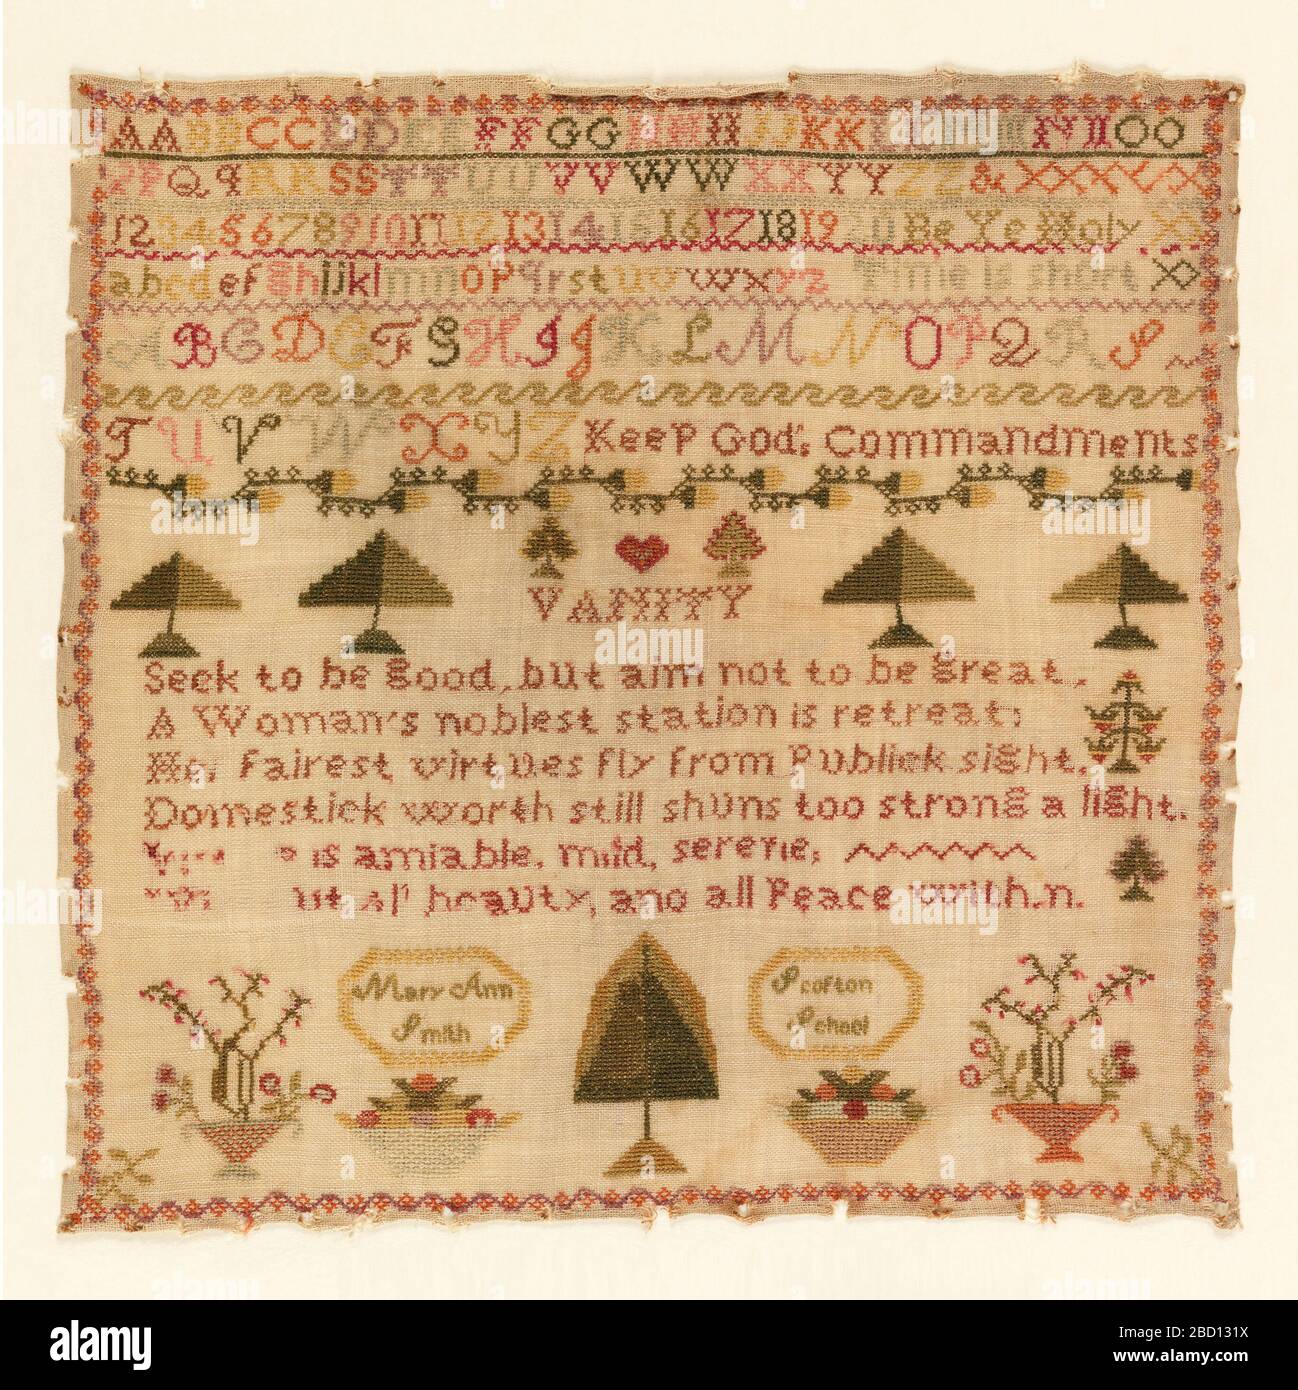 Sampler. Research in ProgressSeveral rows of alphabets and numerals, followed by a row of trees, and a verse:VanitySeek to be good, but aim not to be greatA woman's noblest station is retreatHer fairest virtues fly from publick sightDomestick worth still shuns too strong a lightWoman (?) Sampler Stock Photo